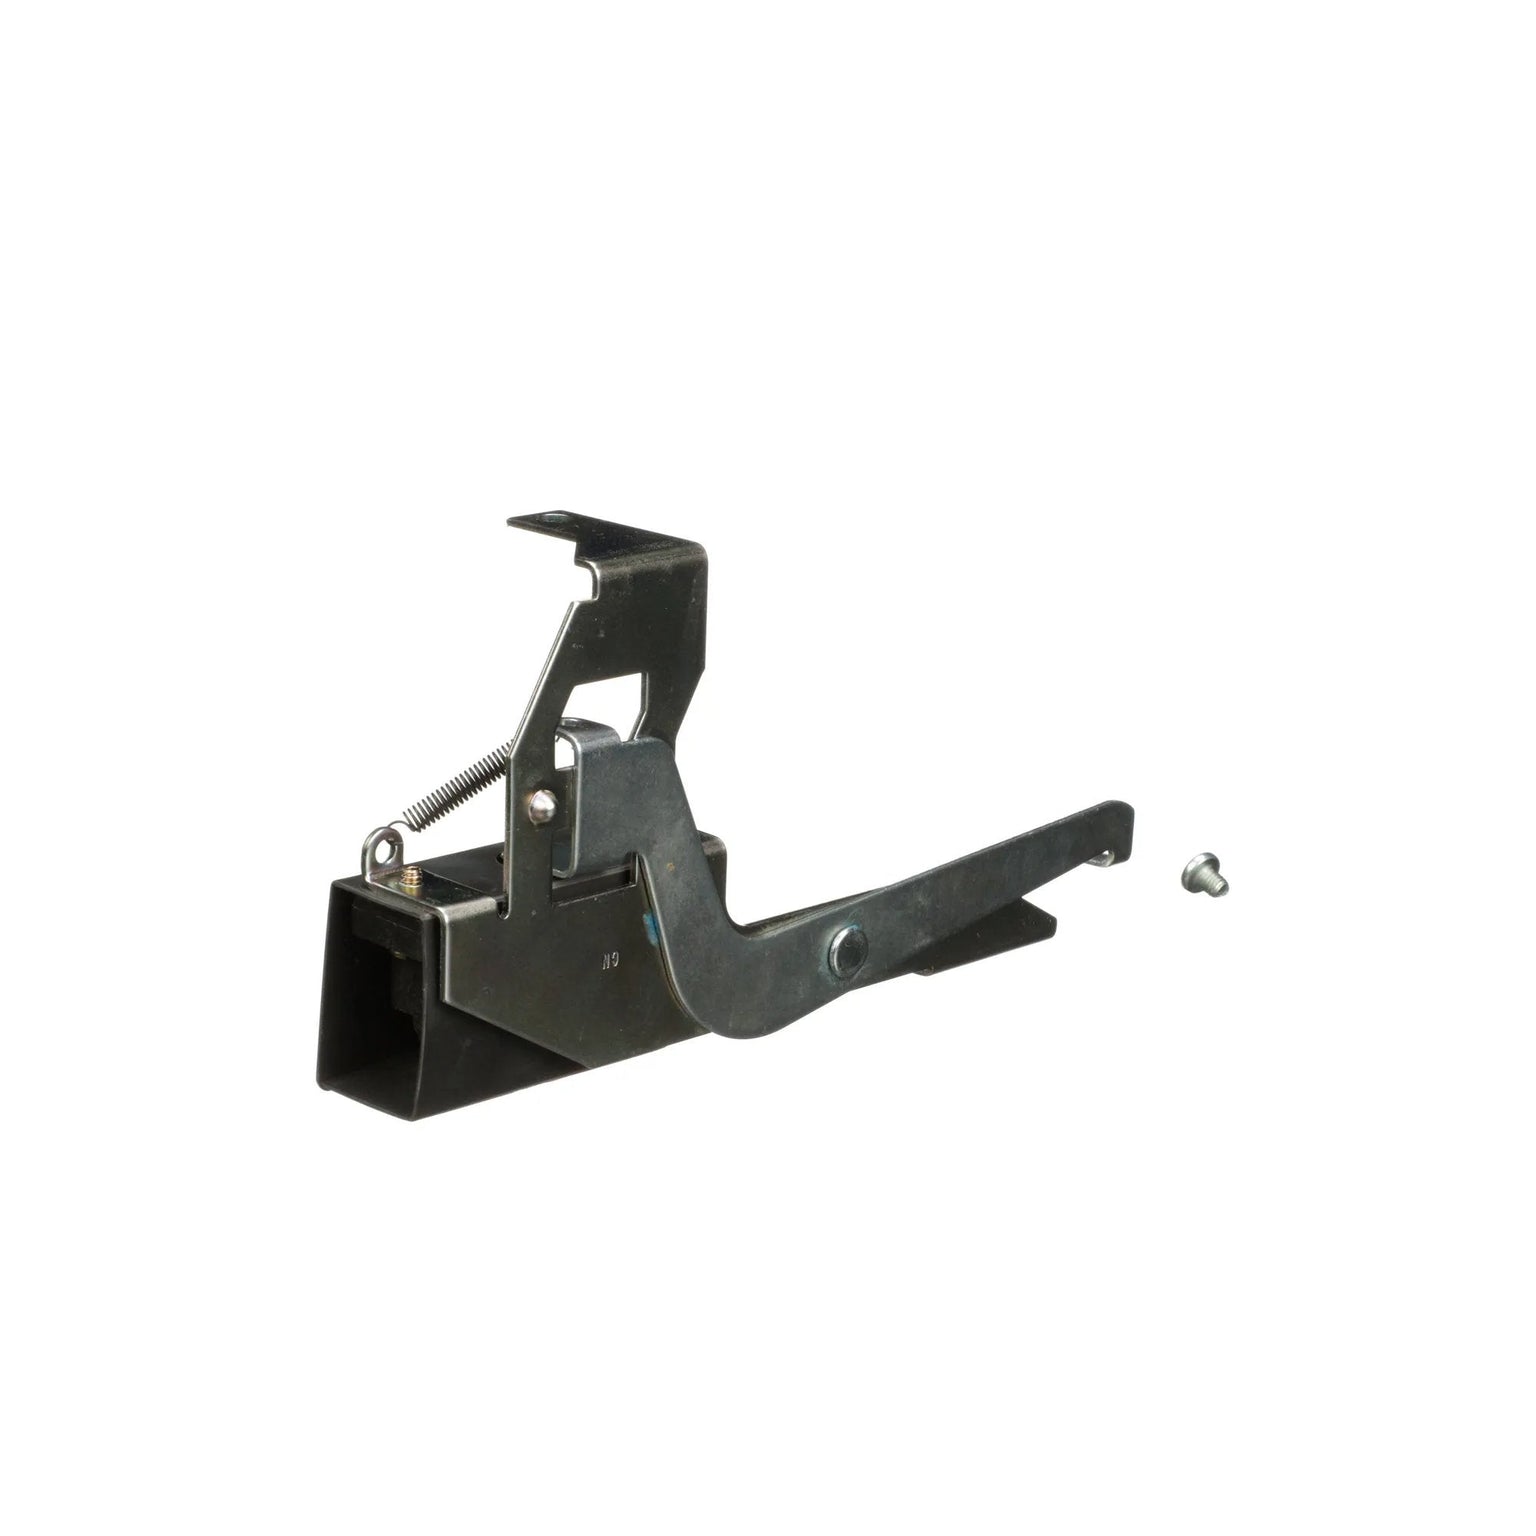 EIK031 - Square D - Switch Parts and Accessories